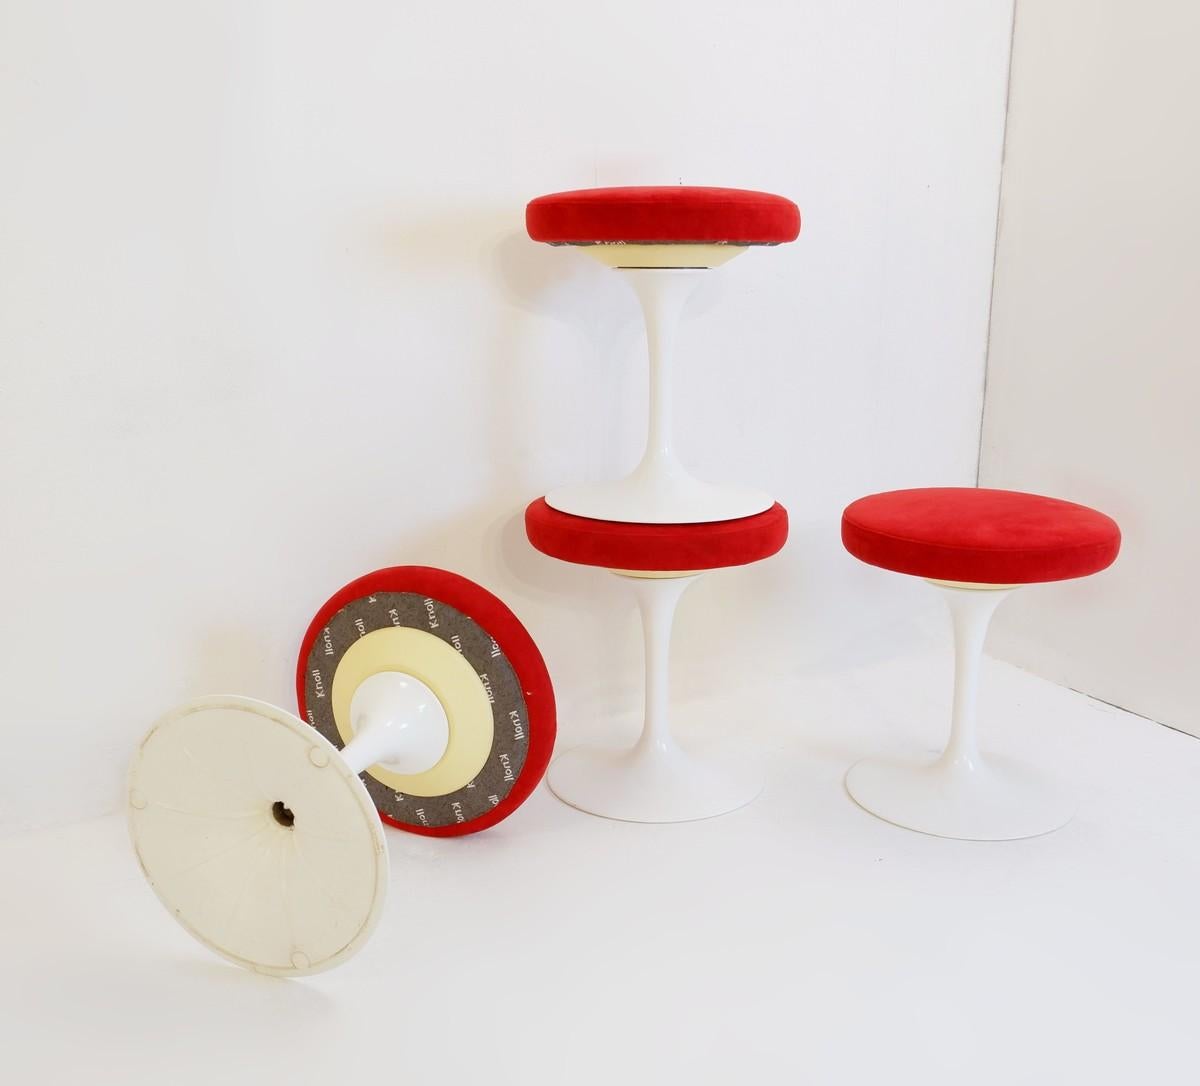 European 'Tulip ' Swivel Stools by Knoll, Red Suede Seat, 2 Available